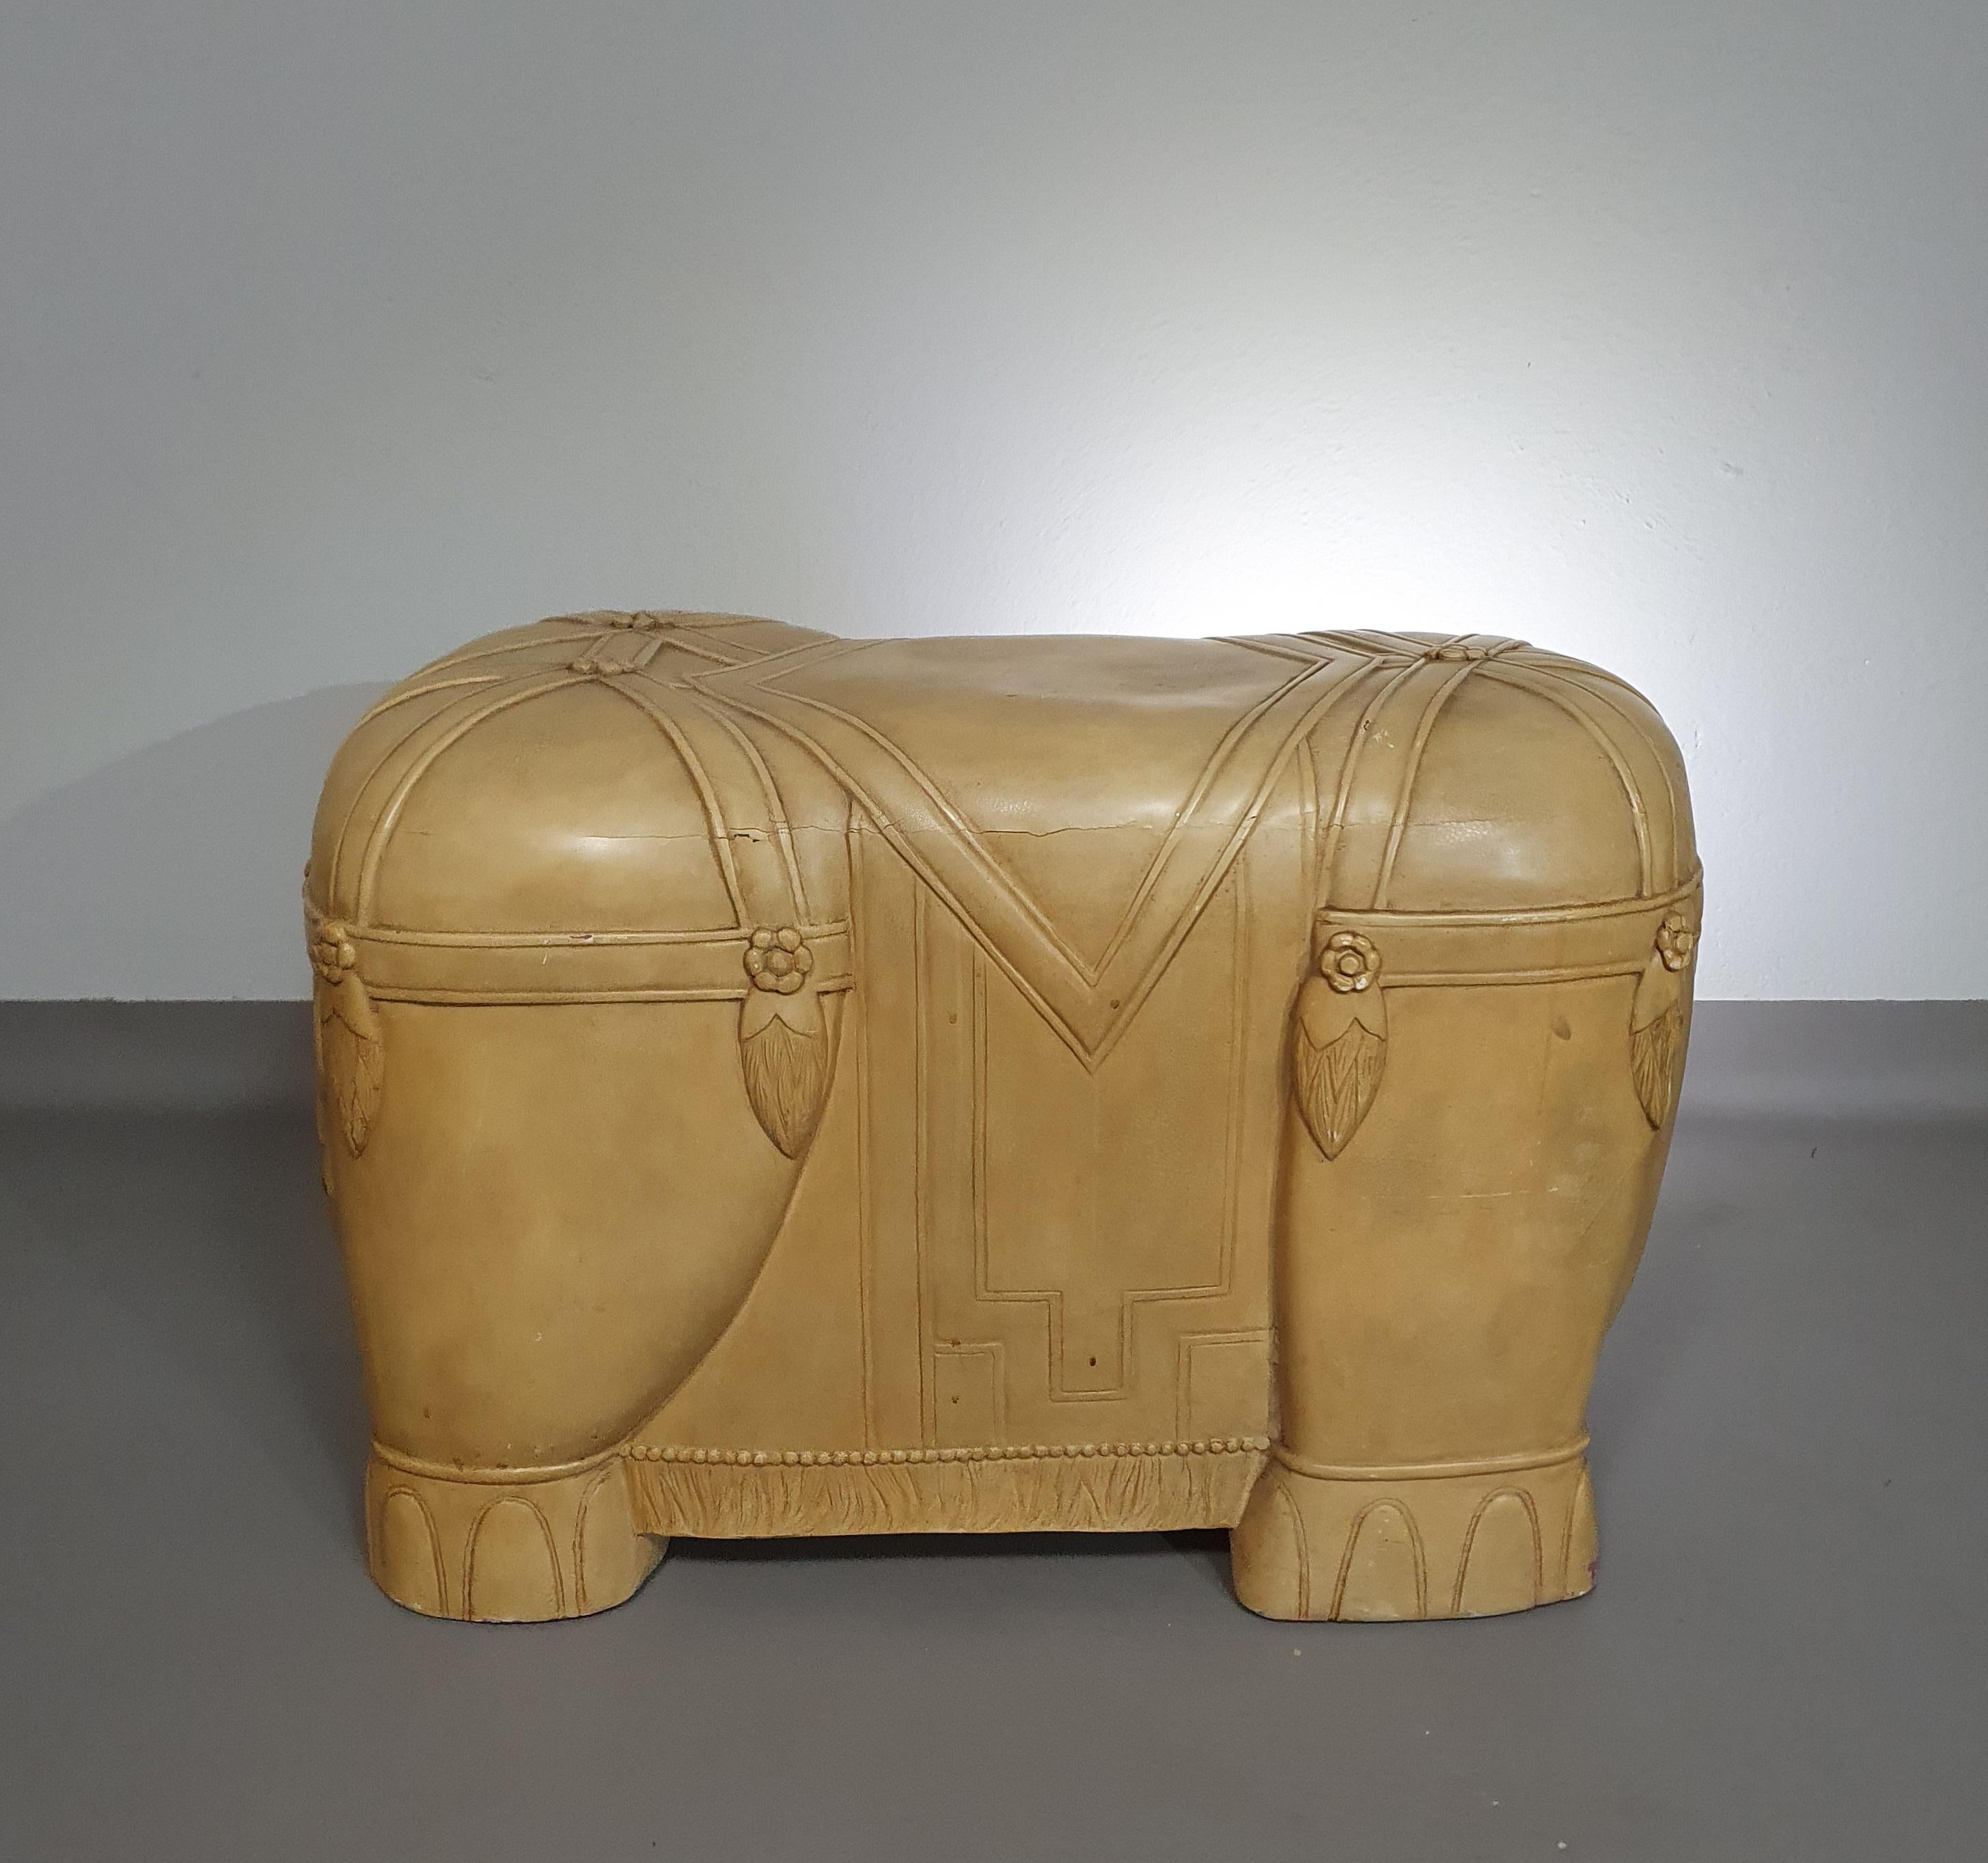 Decorative wood and resin elephant form table For Sale 12